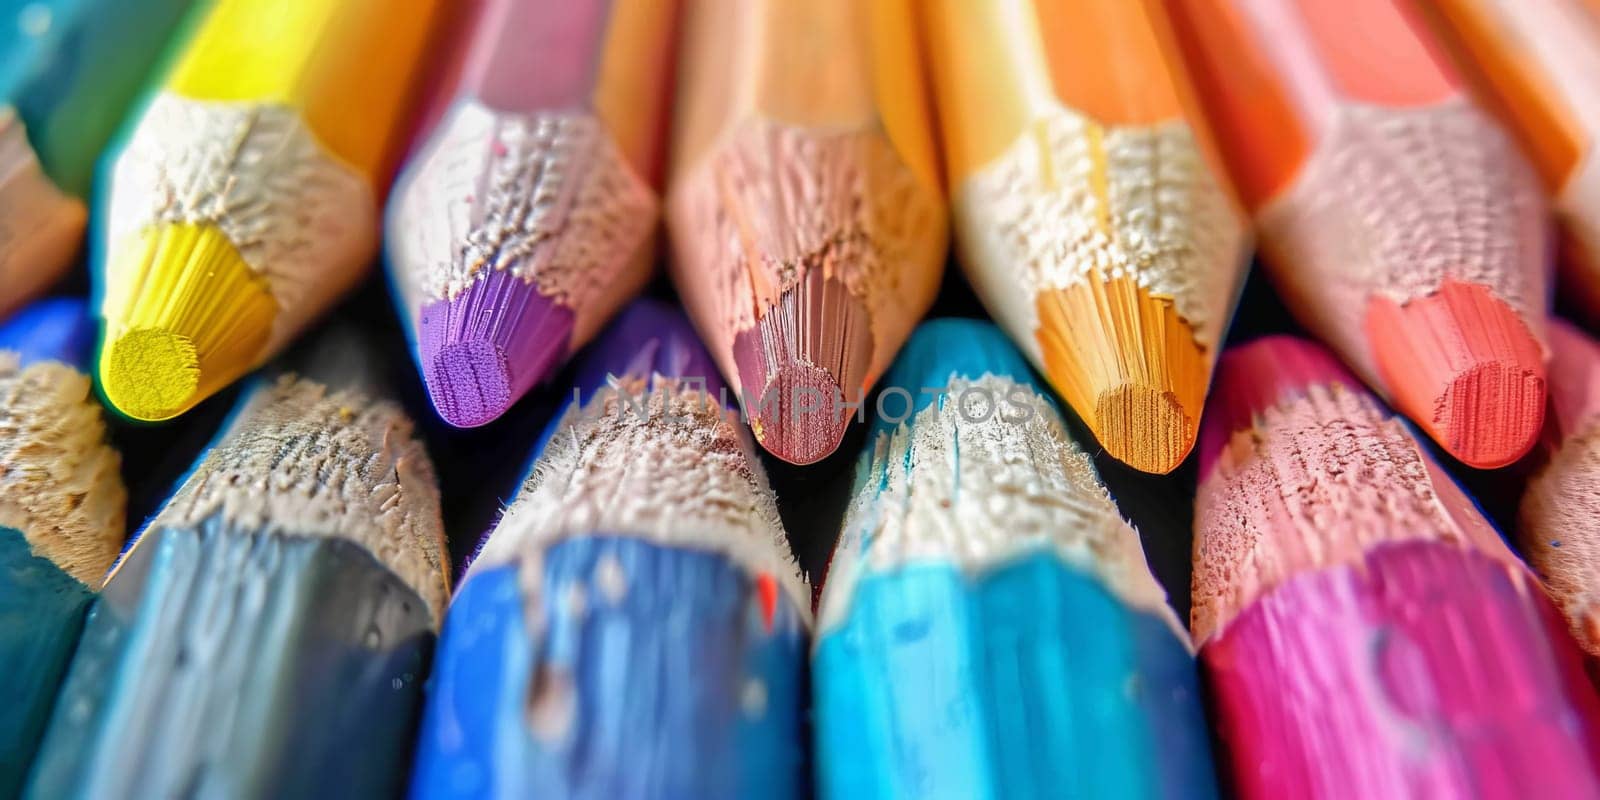 Colorful pencils for drawing, close-up, selective focus by ailike